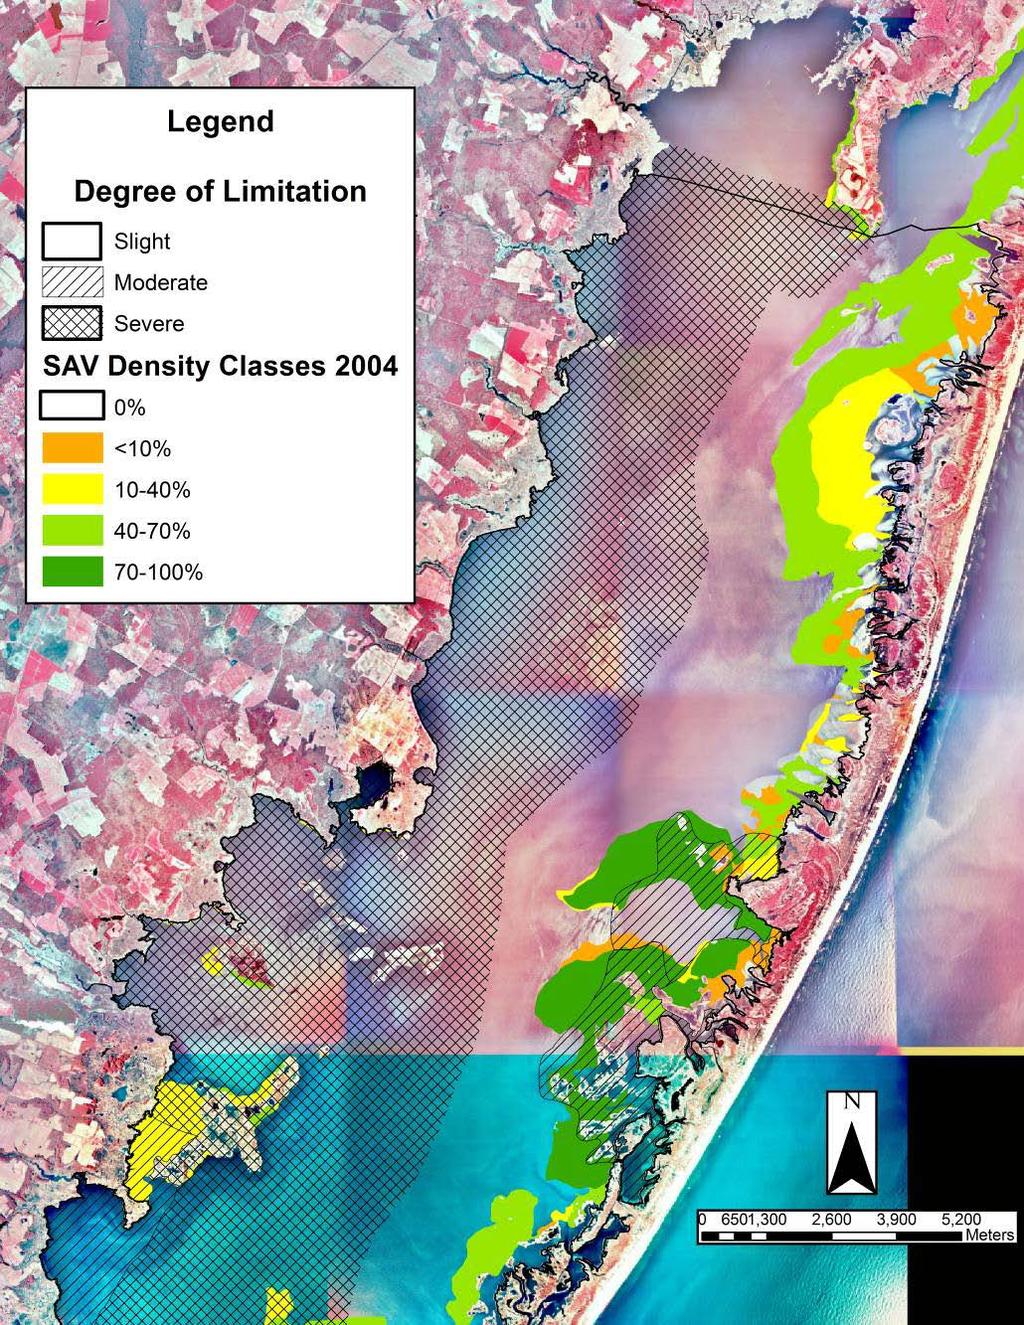 Suitability Map Tested based on past and present SAV growth patterns in Chincoteague Bay